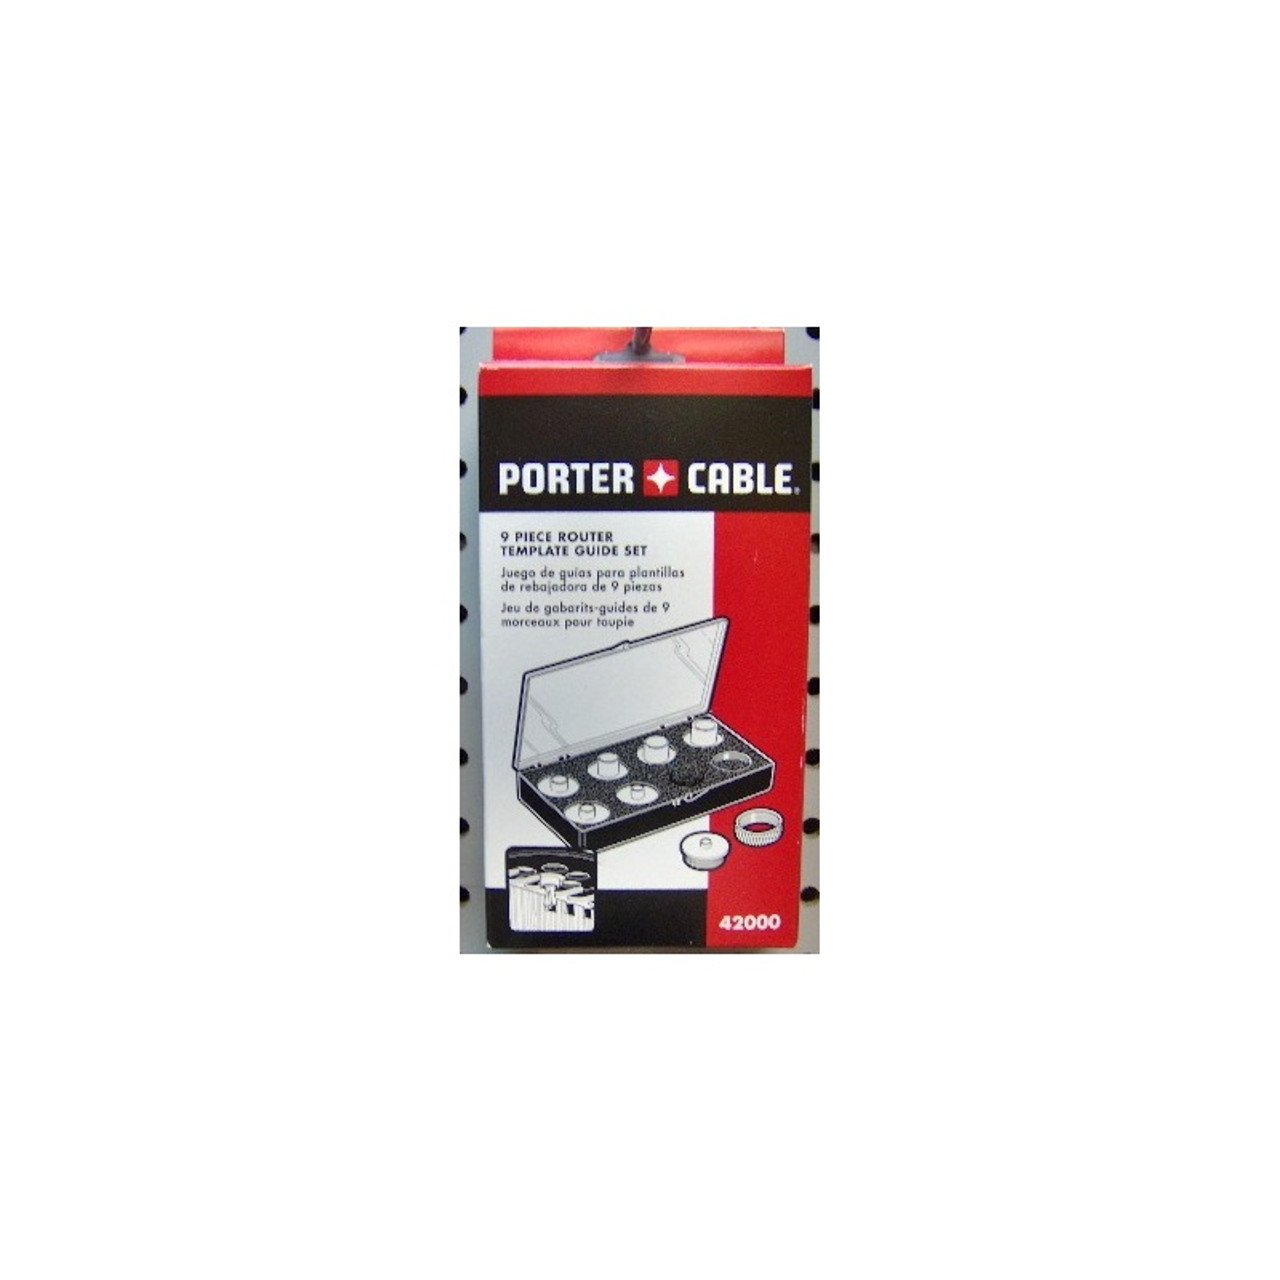 Porter-Cable 42000 9 Piece Router Template Guide Kit